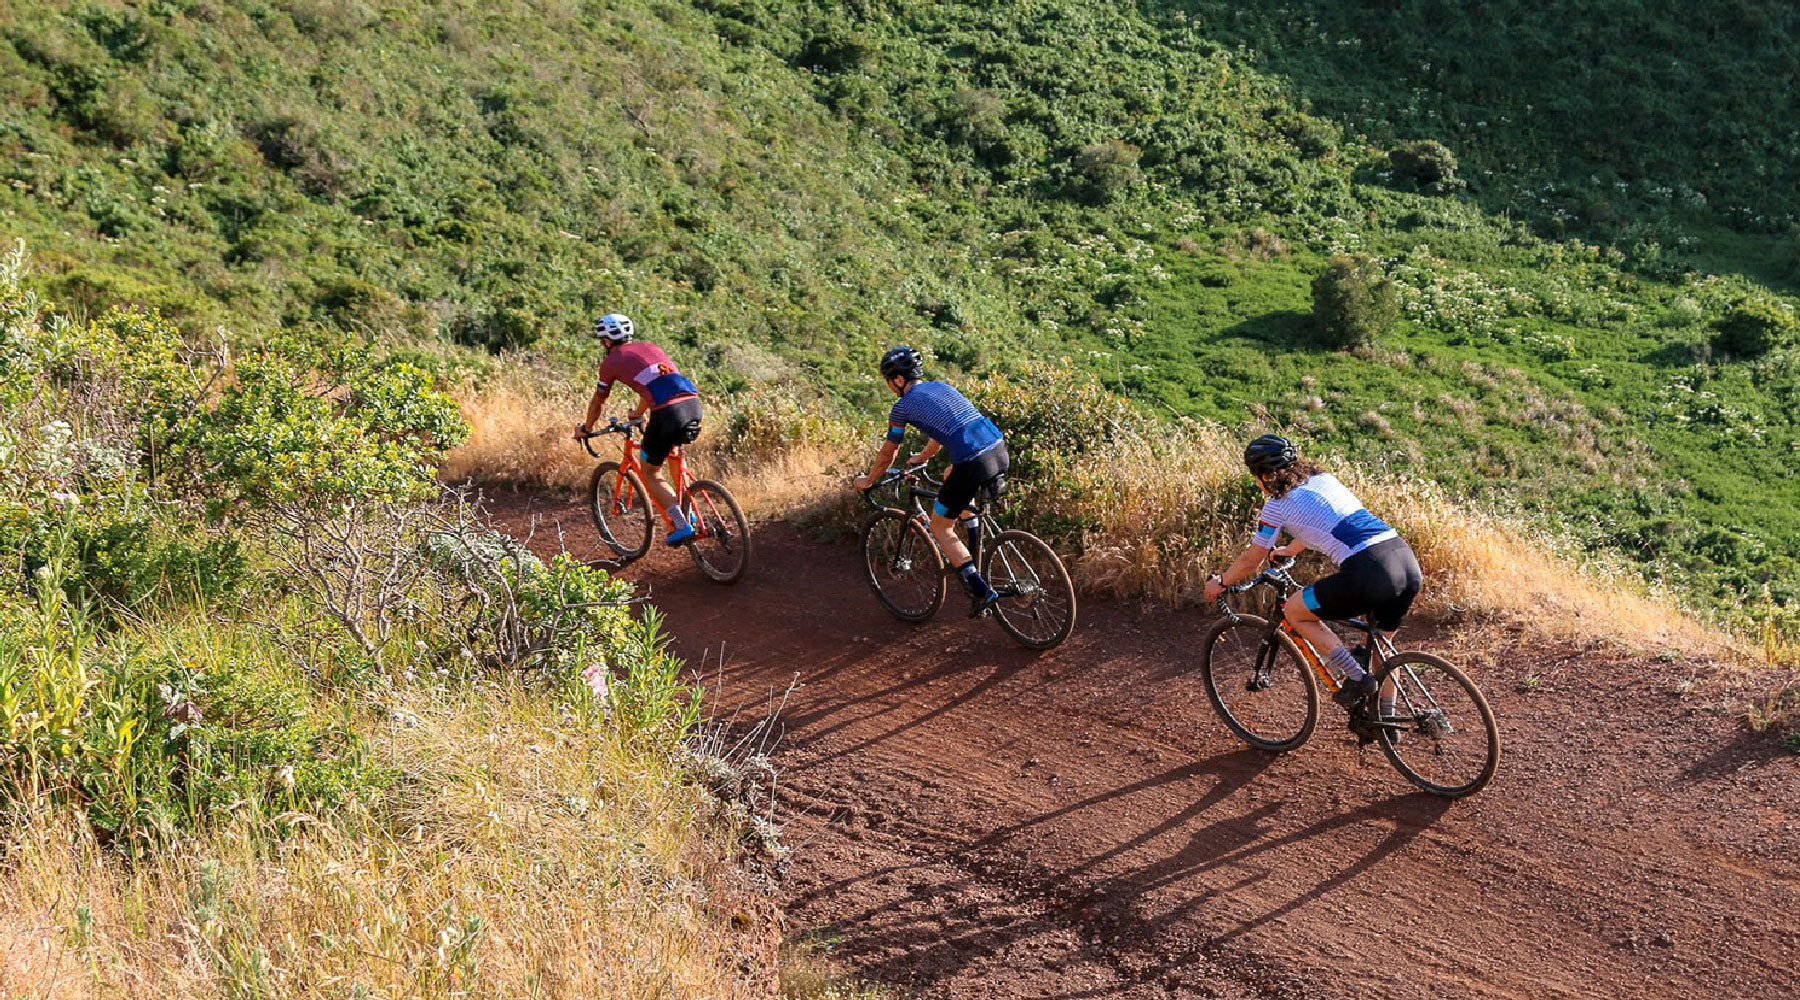 A Beginners Guide to Gravel Riding